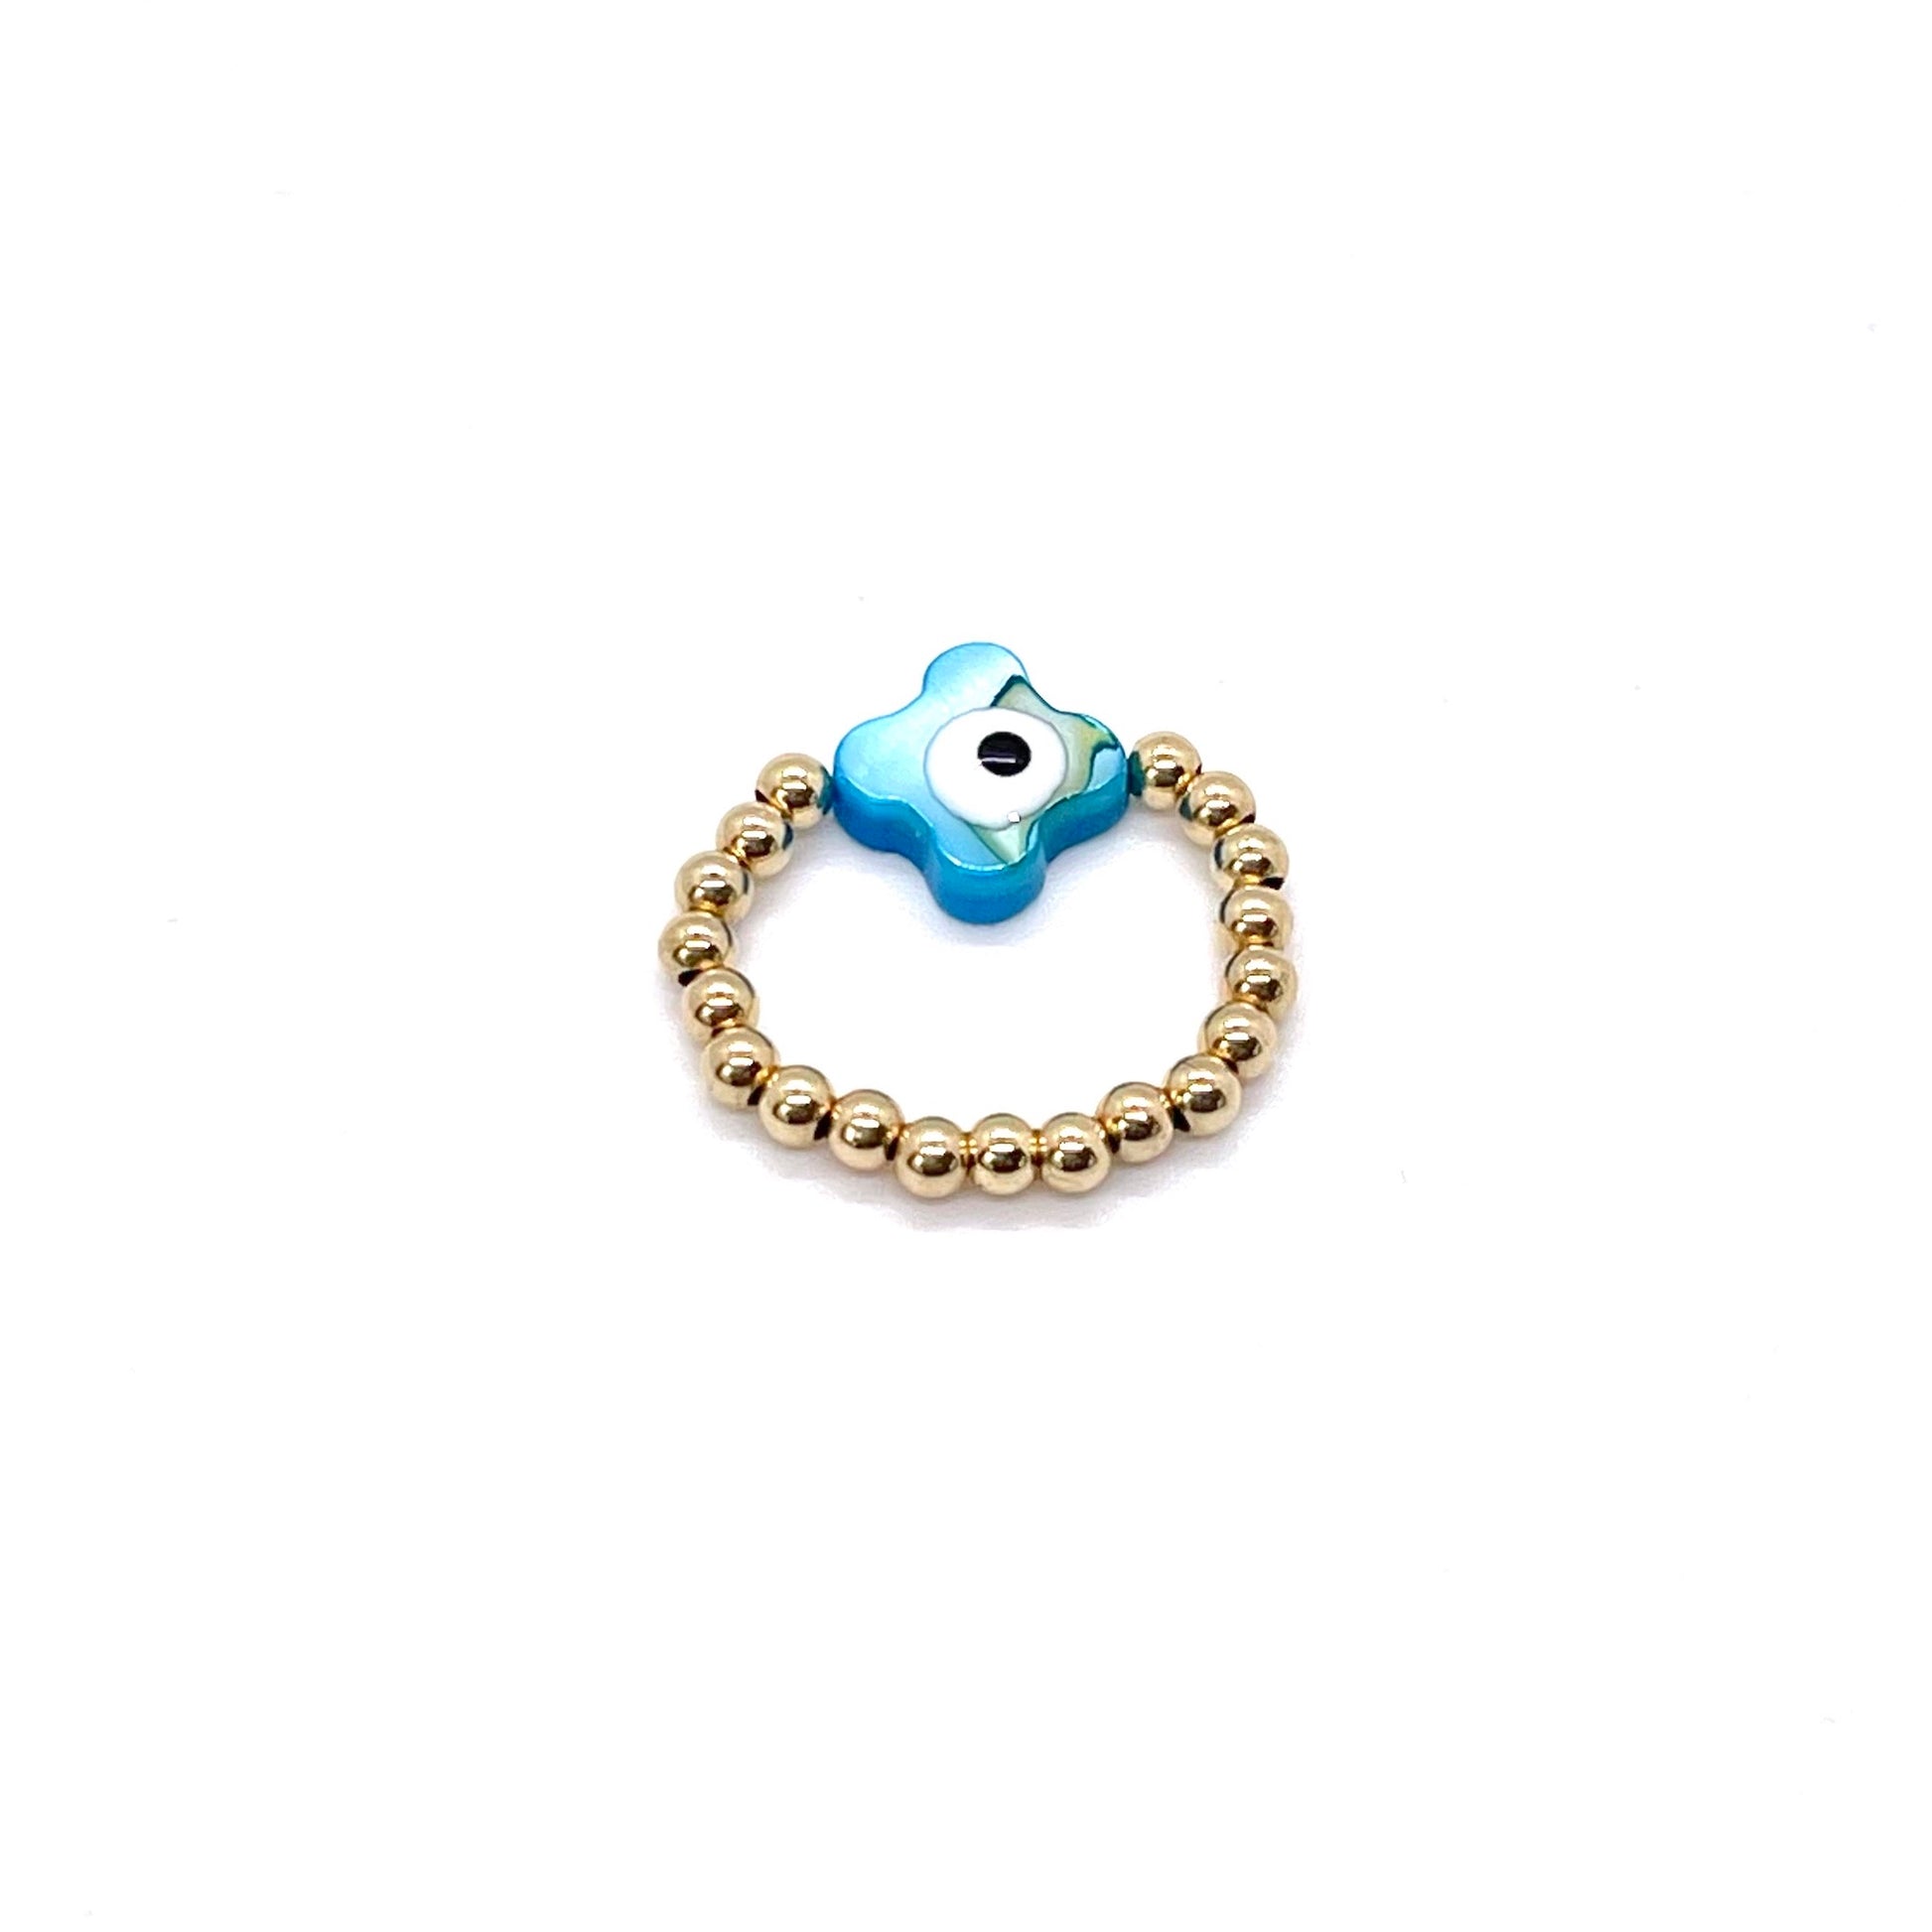 Blue evil eye shell ring with 3mm 14K gold filled ball stretch band.